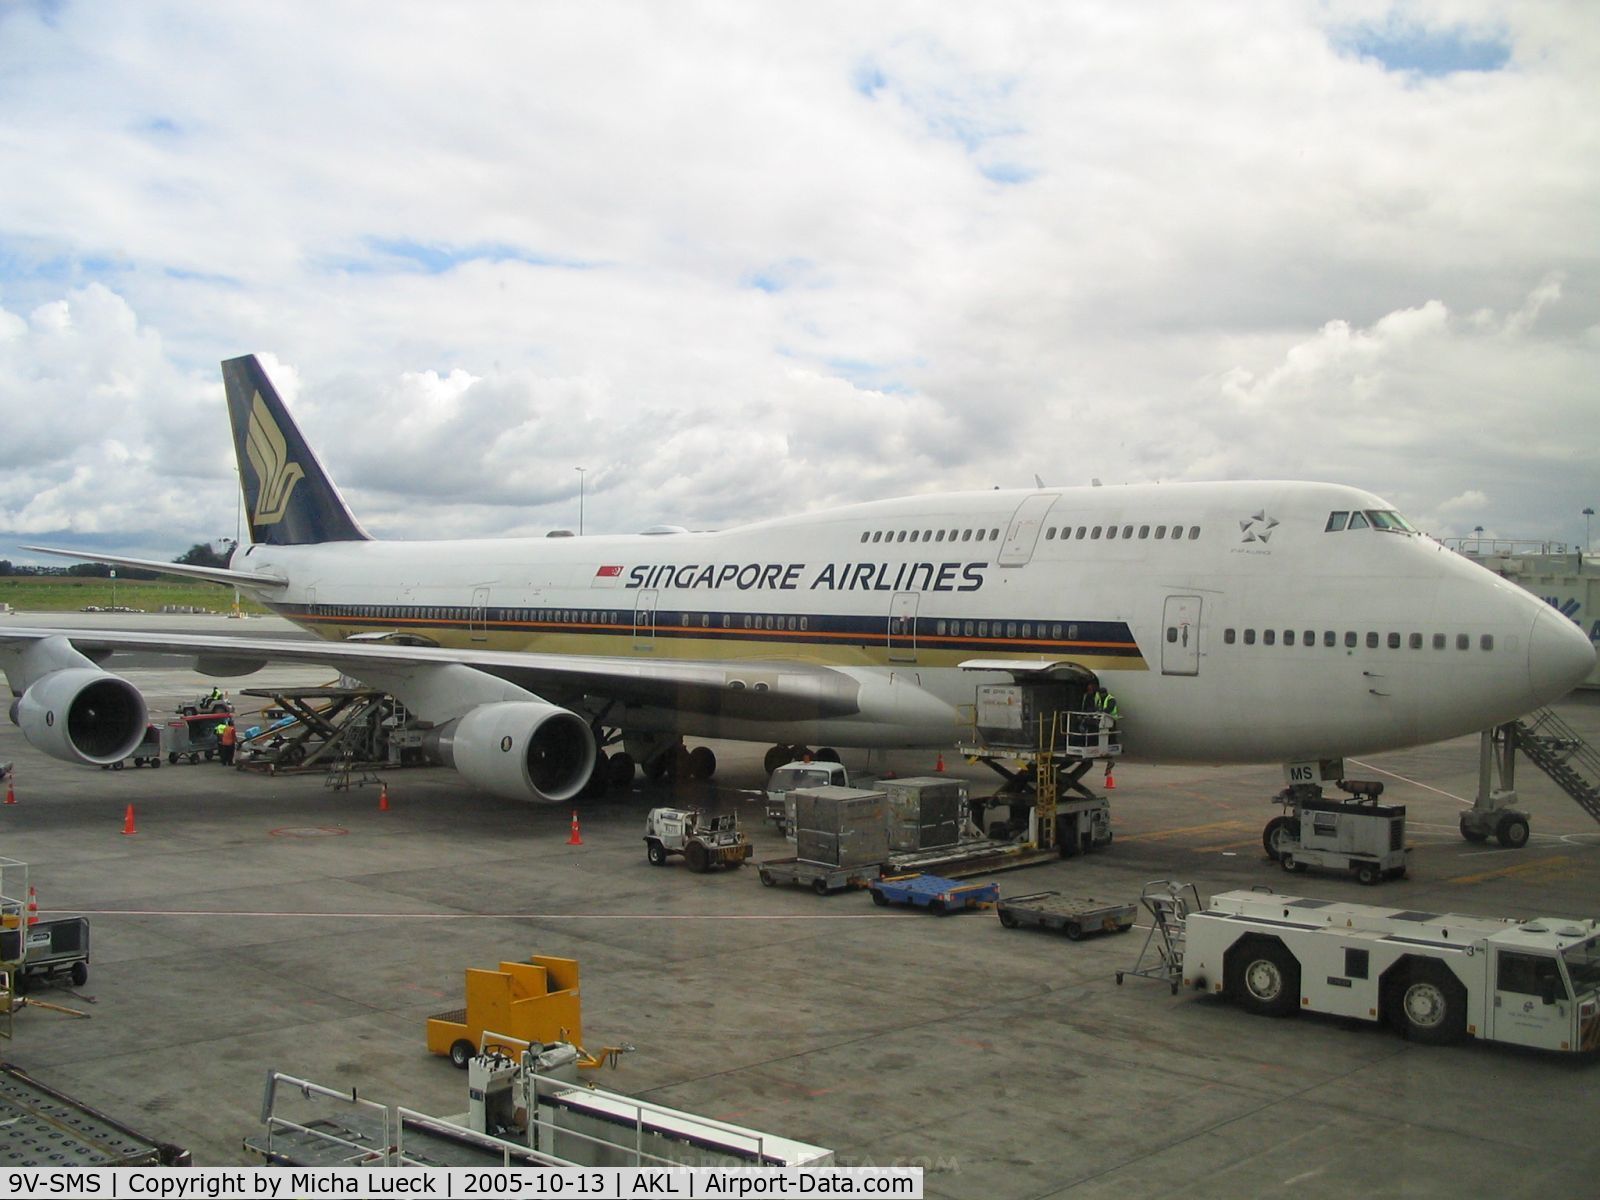 9V-SMS, 1993 Boeing 747-412 C/N 27134, Just arrived from Singapore